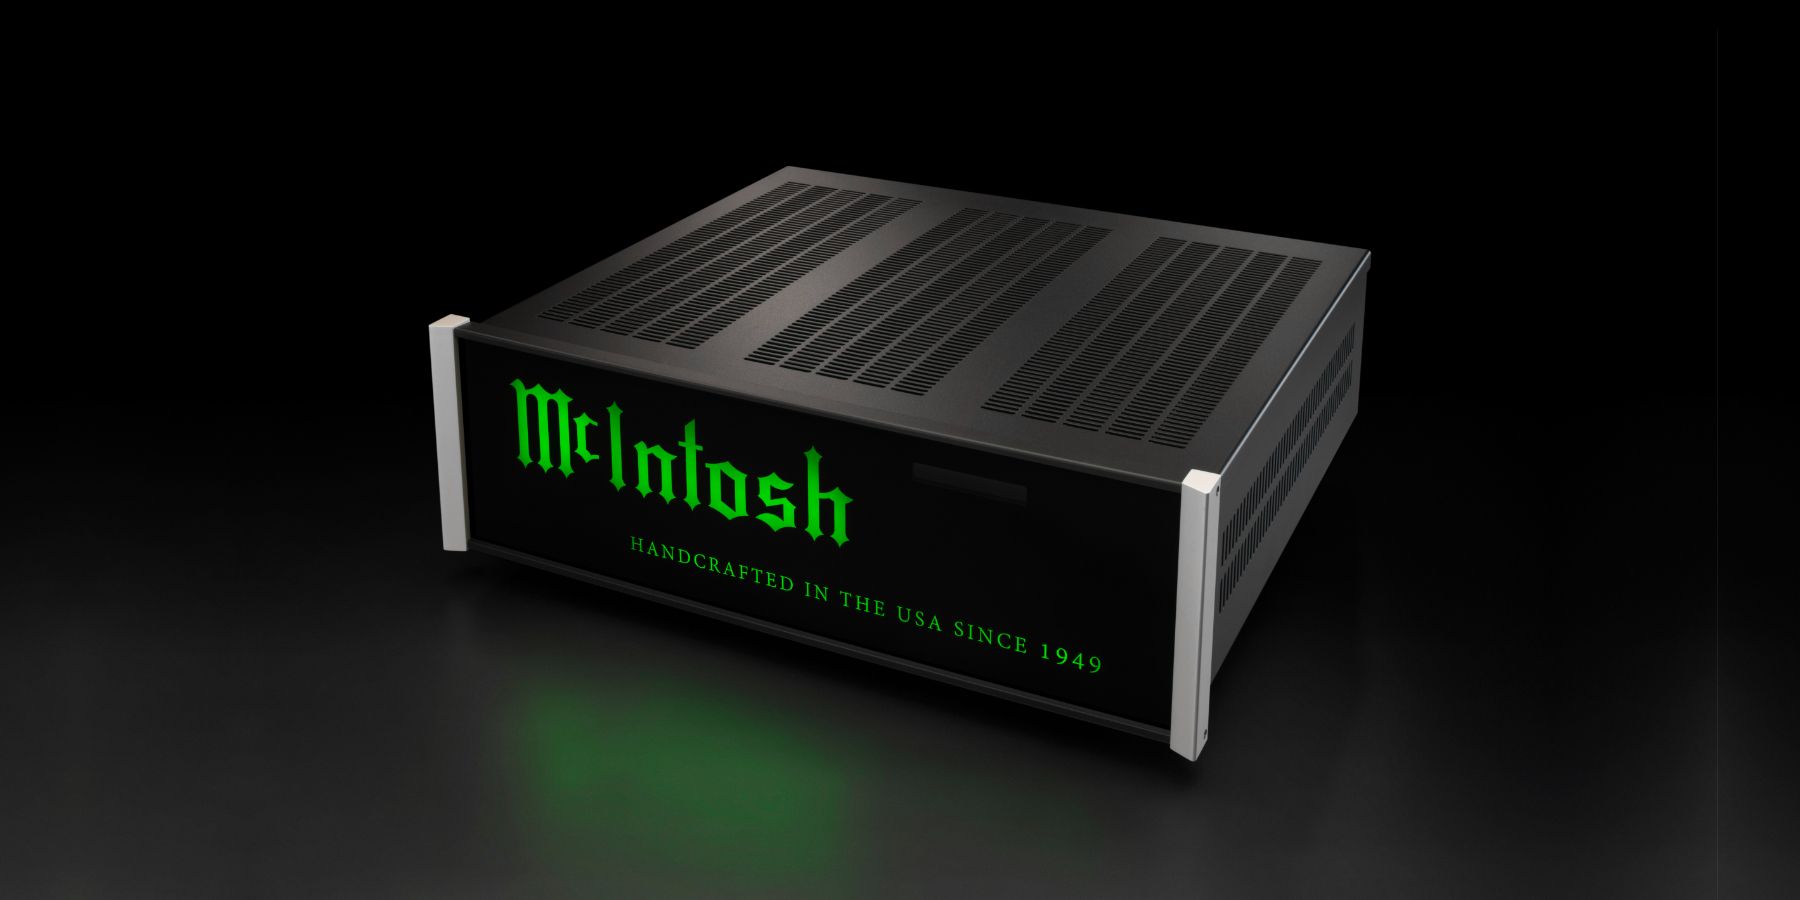 McIntosh has just launched the LB200, a new version of their popular Light Box